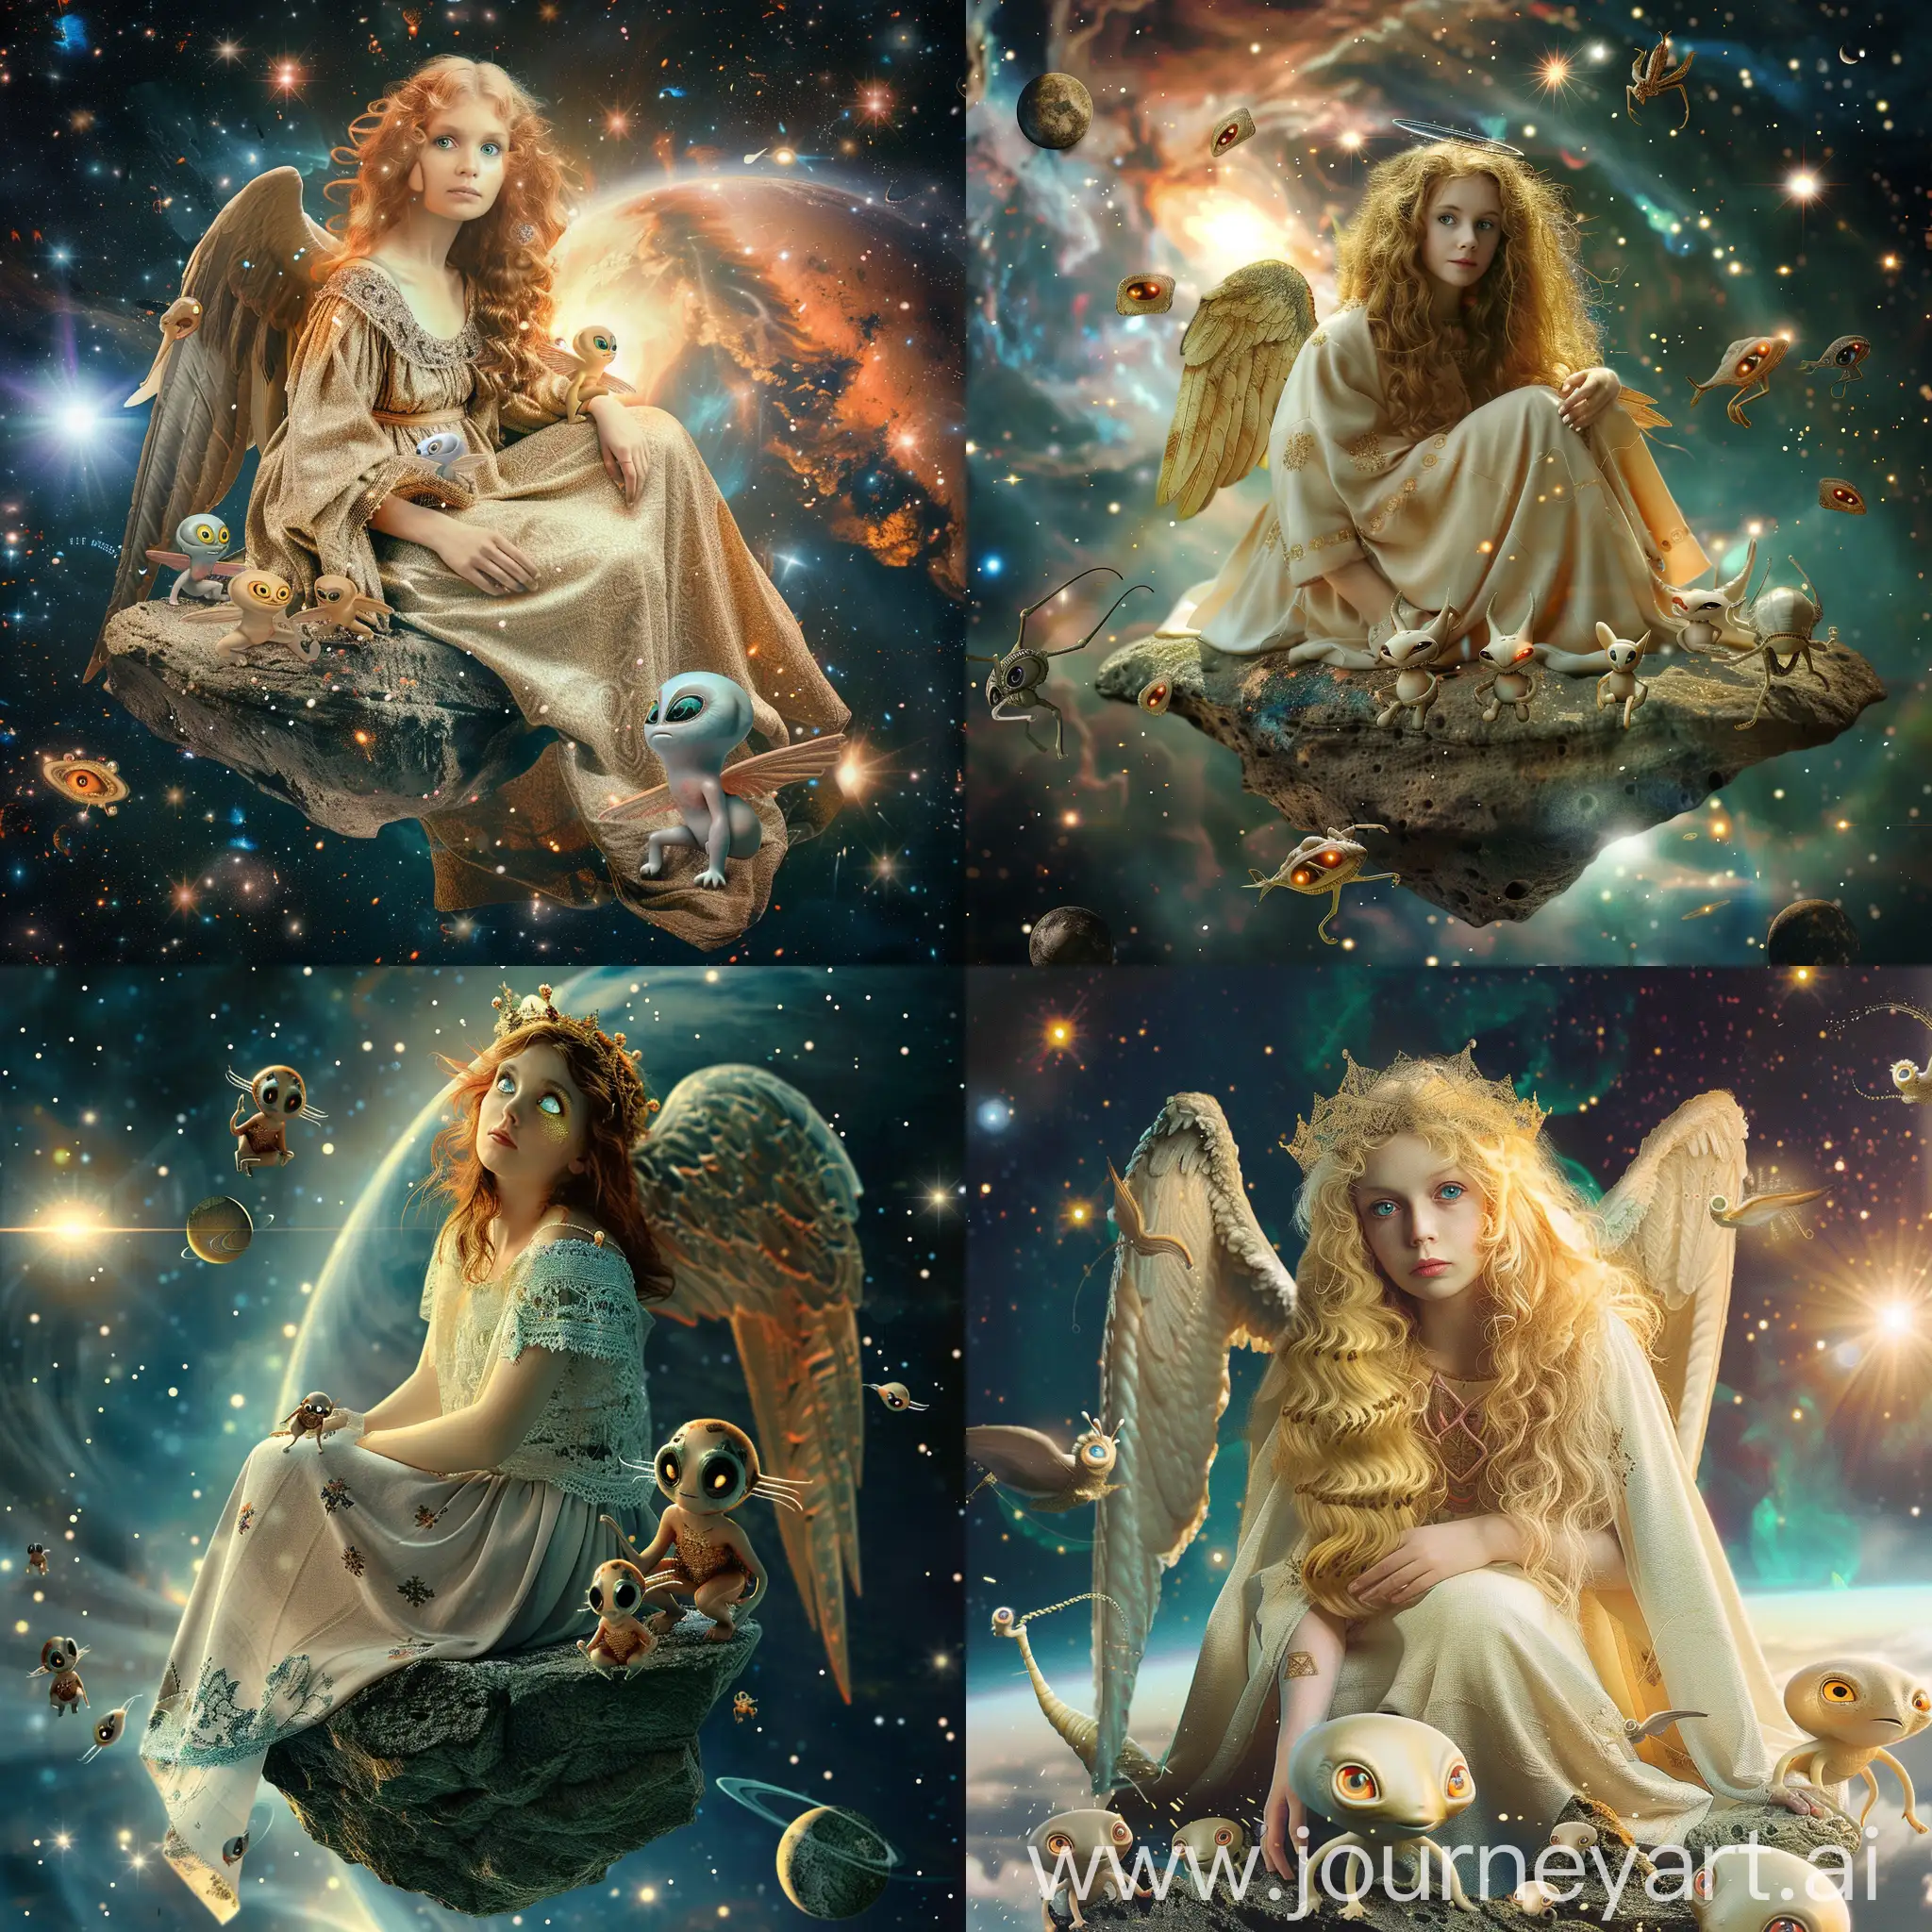 Medieval-Angel-Woman-with-Cute-Aliens-in-Starry-Space